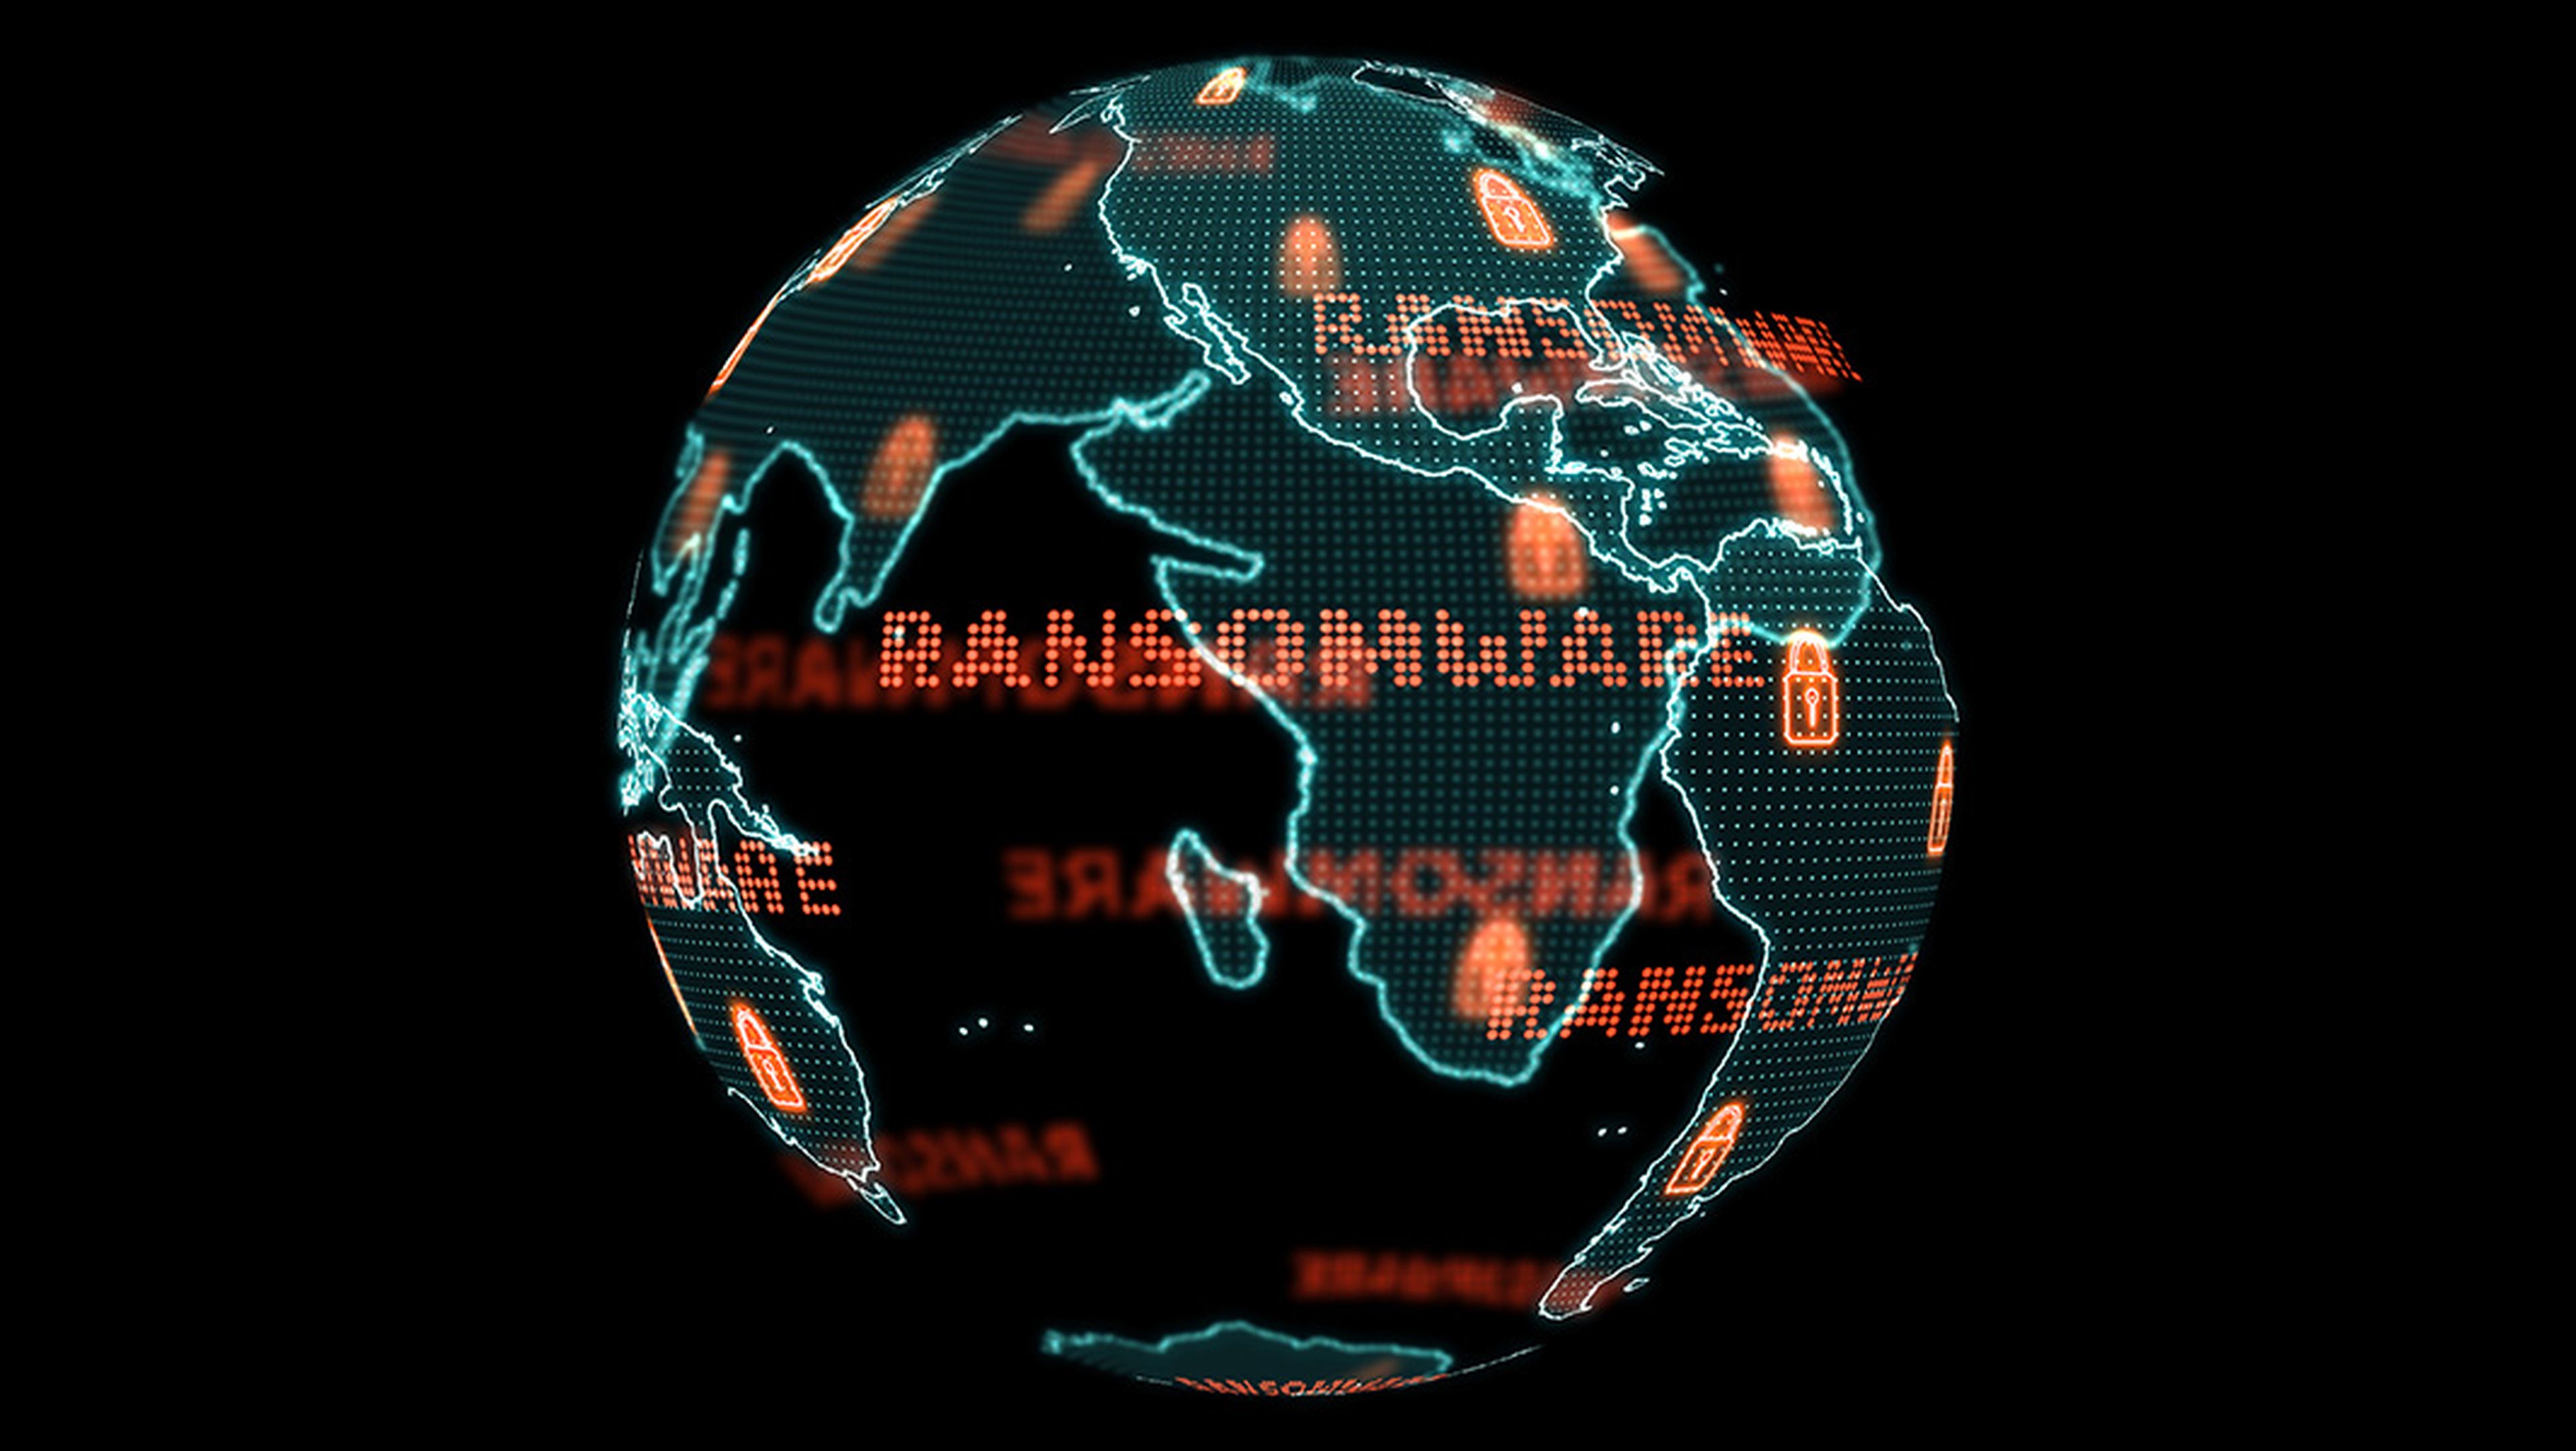 Digital global world map and technology research develpoment analysis to ransomware attack